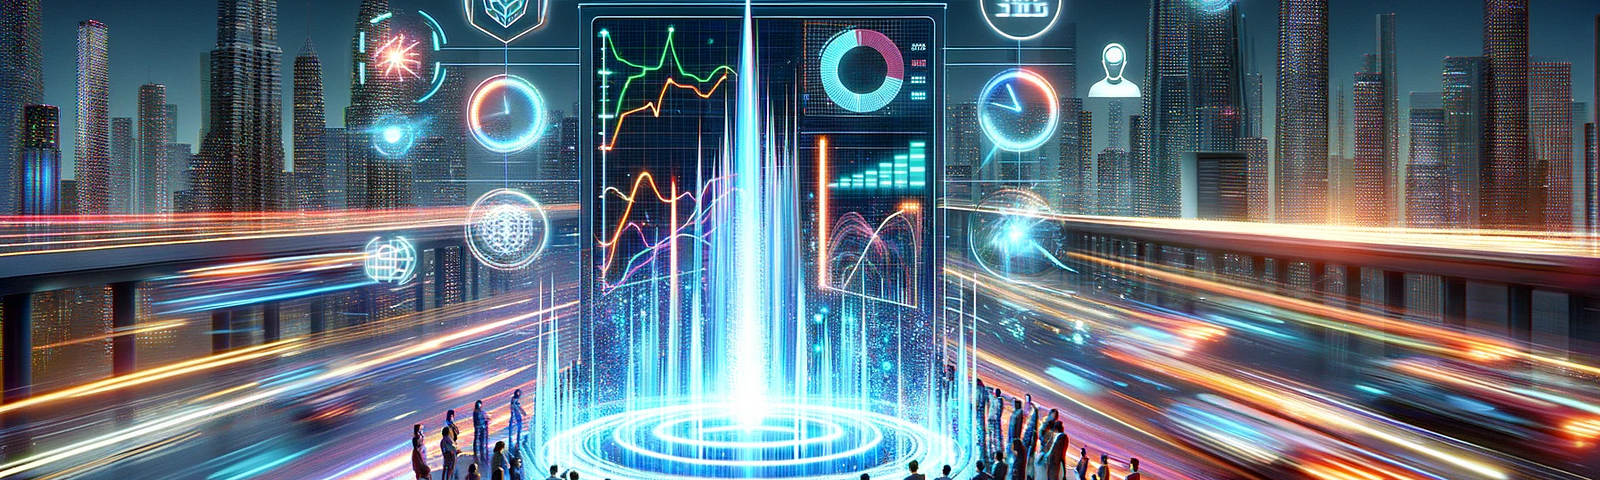 An image showing a diverse group of people of various descents and genders, gathered around a glowing AI interface with graphs and data in a dynamic, futuristic city setting. The scene represents the impact of AI in accelerating tasks and its transformative role in a fast-paced world.